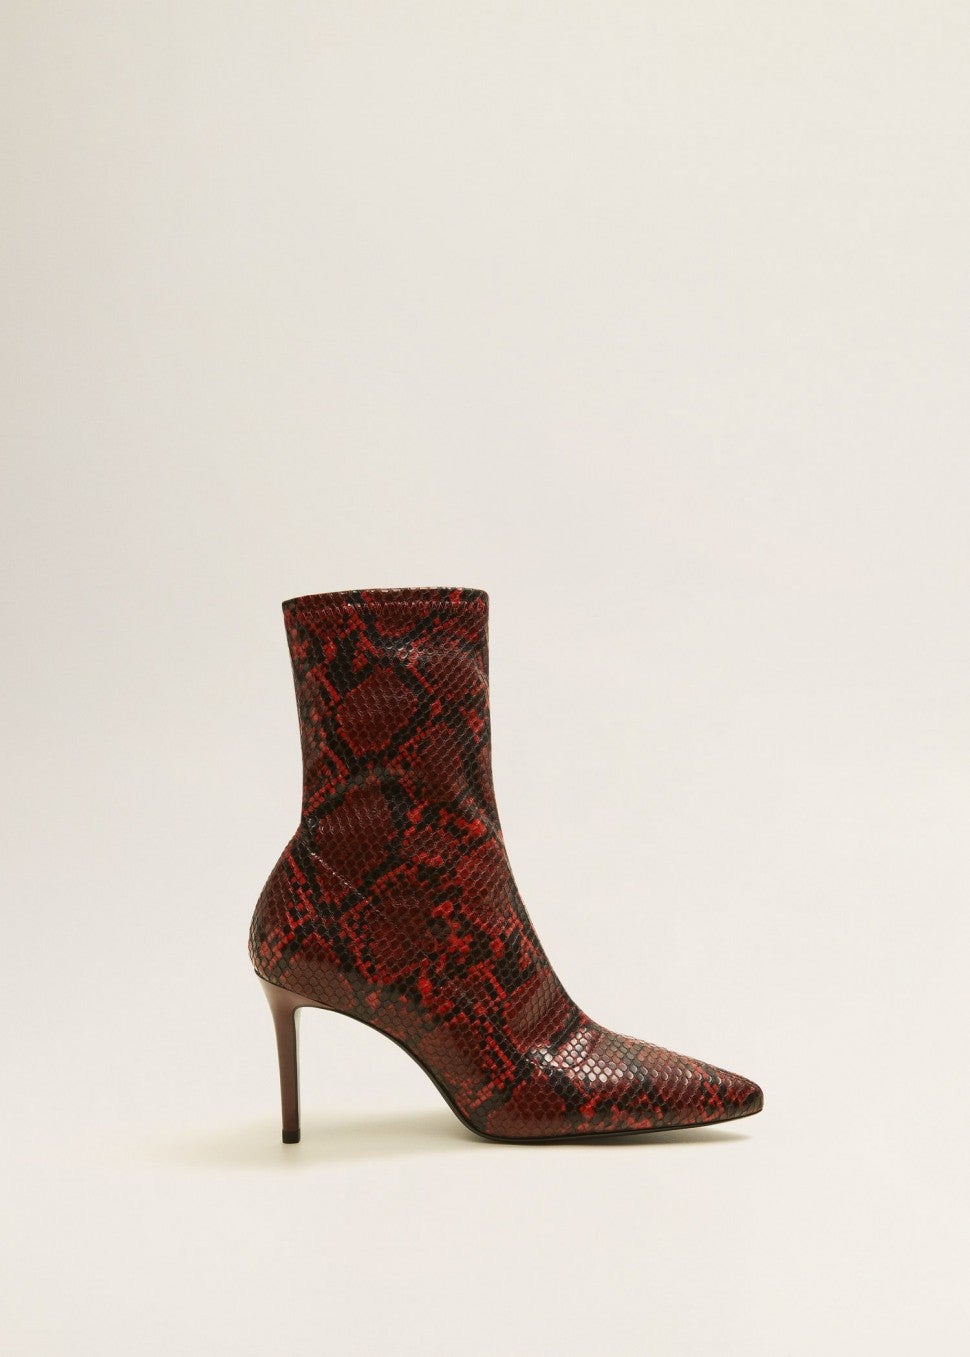 Mango red snakeskin boots